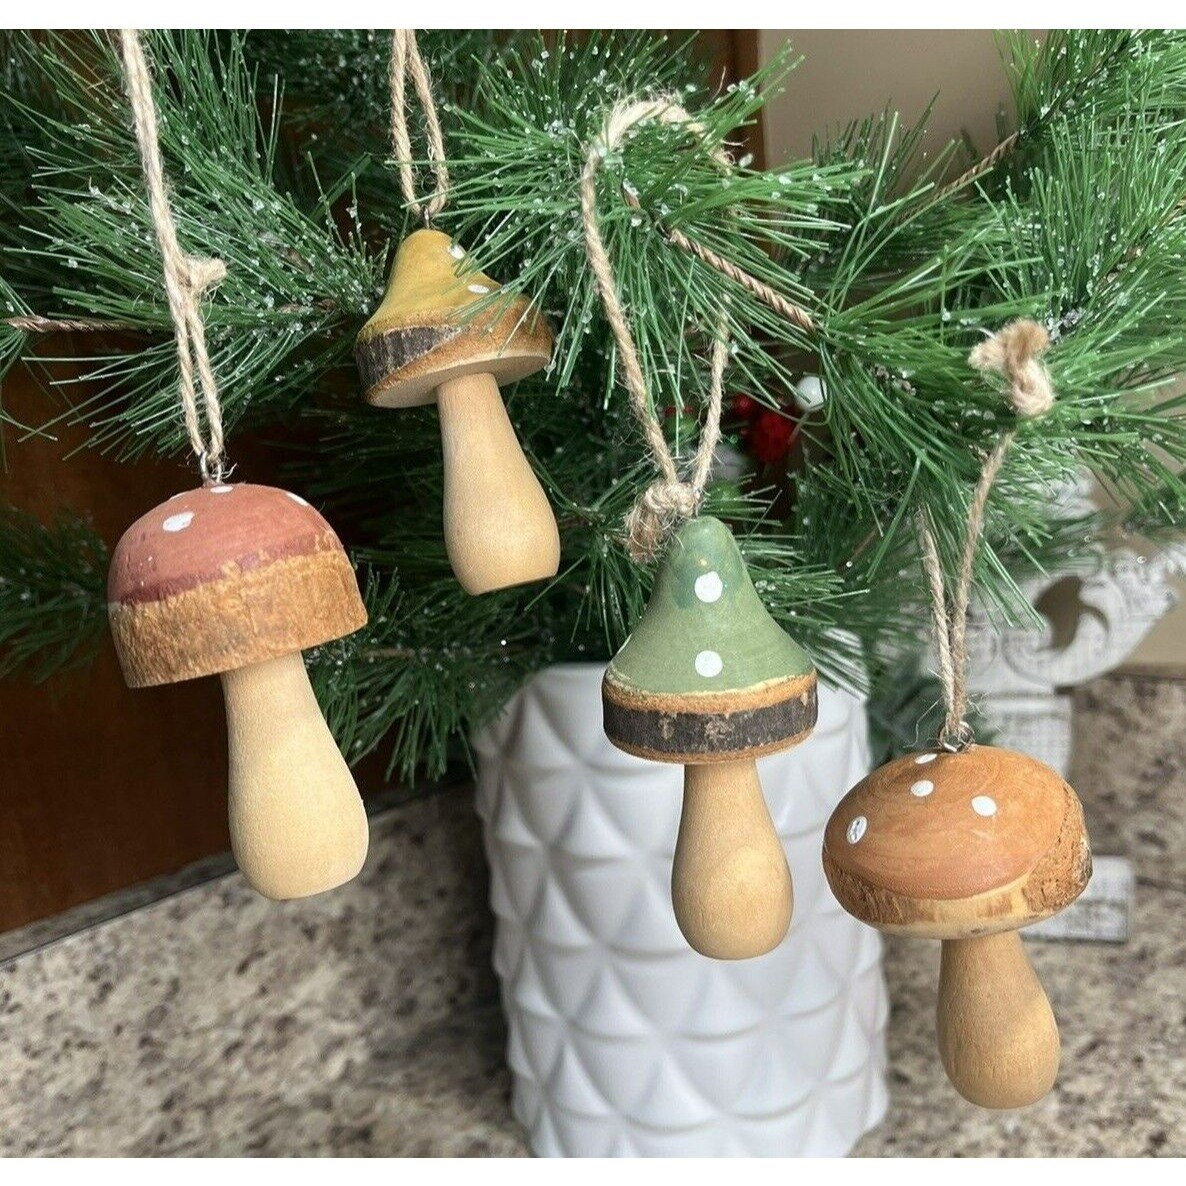 How to Make Mushroom Ornaments ⋆ SomeTyme Place